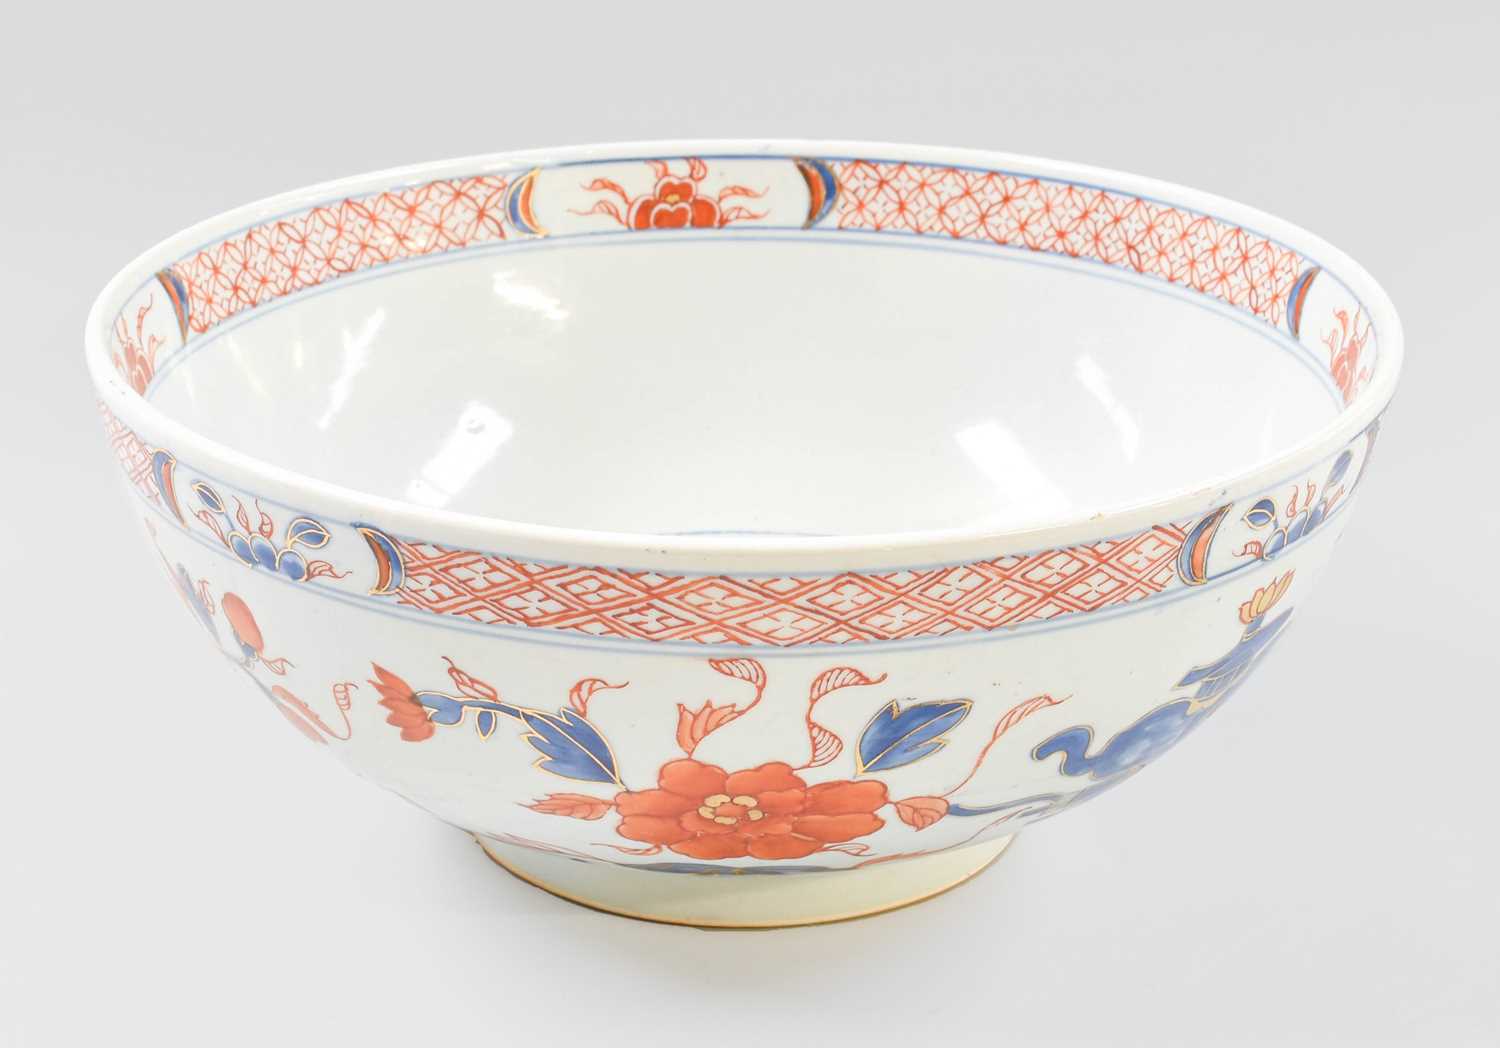 A Chinese Porcelain Bowl, Qianlong style, painted in the Imari palette with scholar's objects and